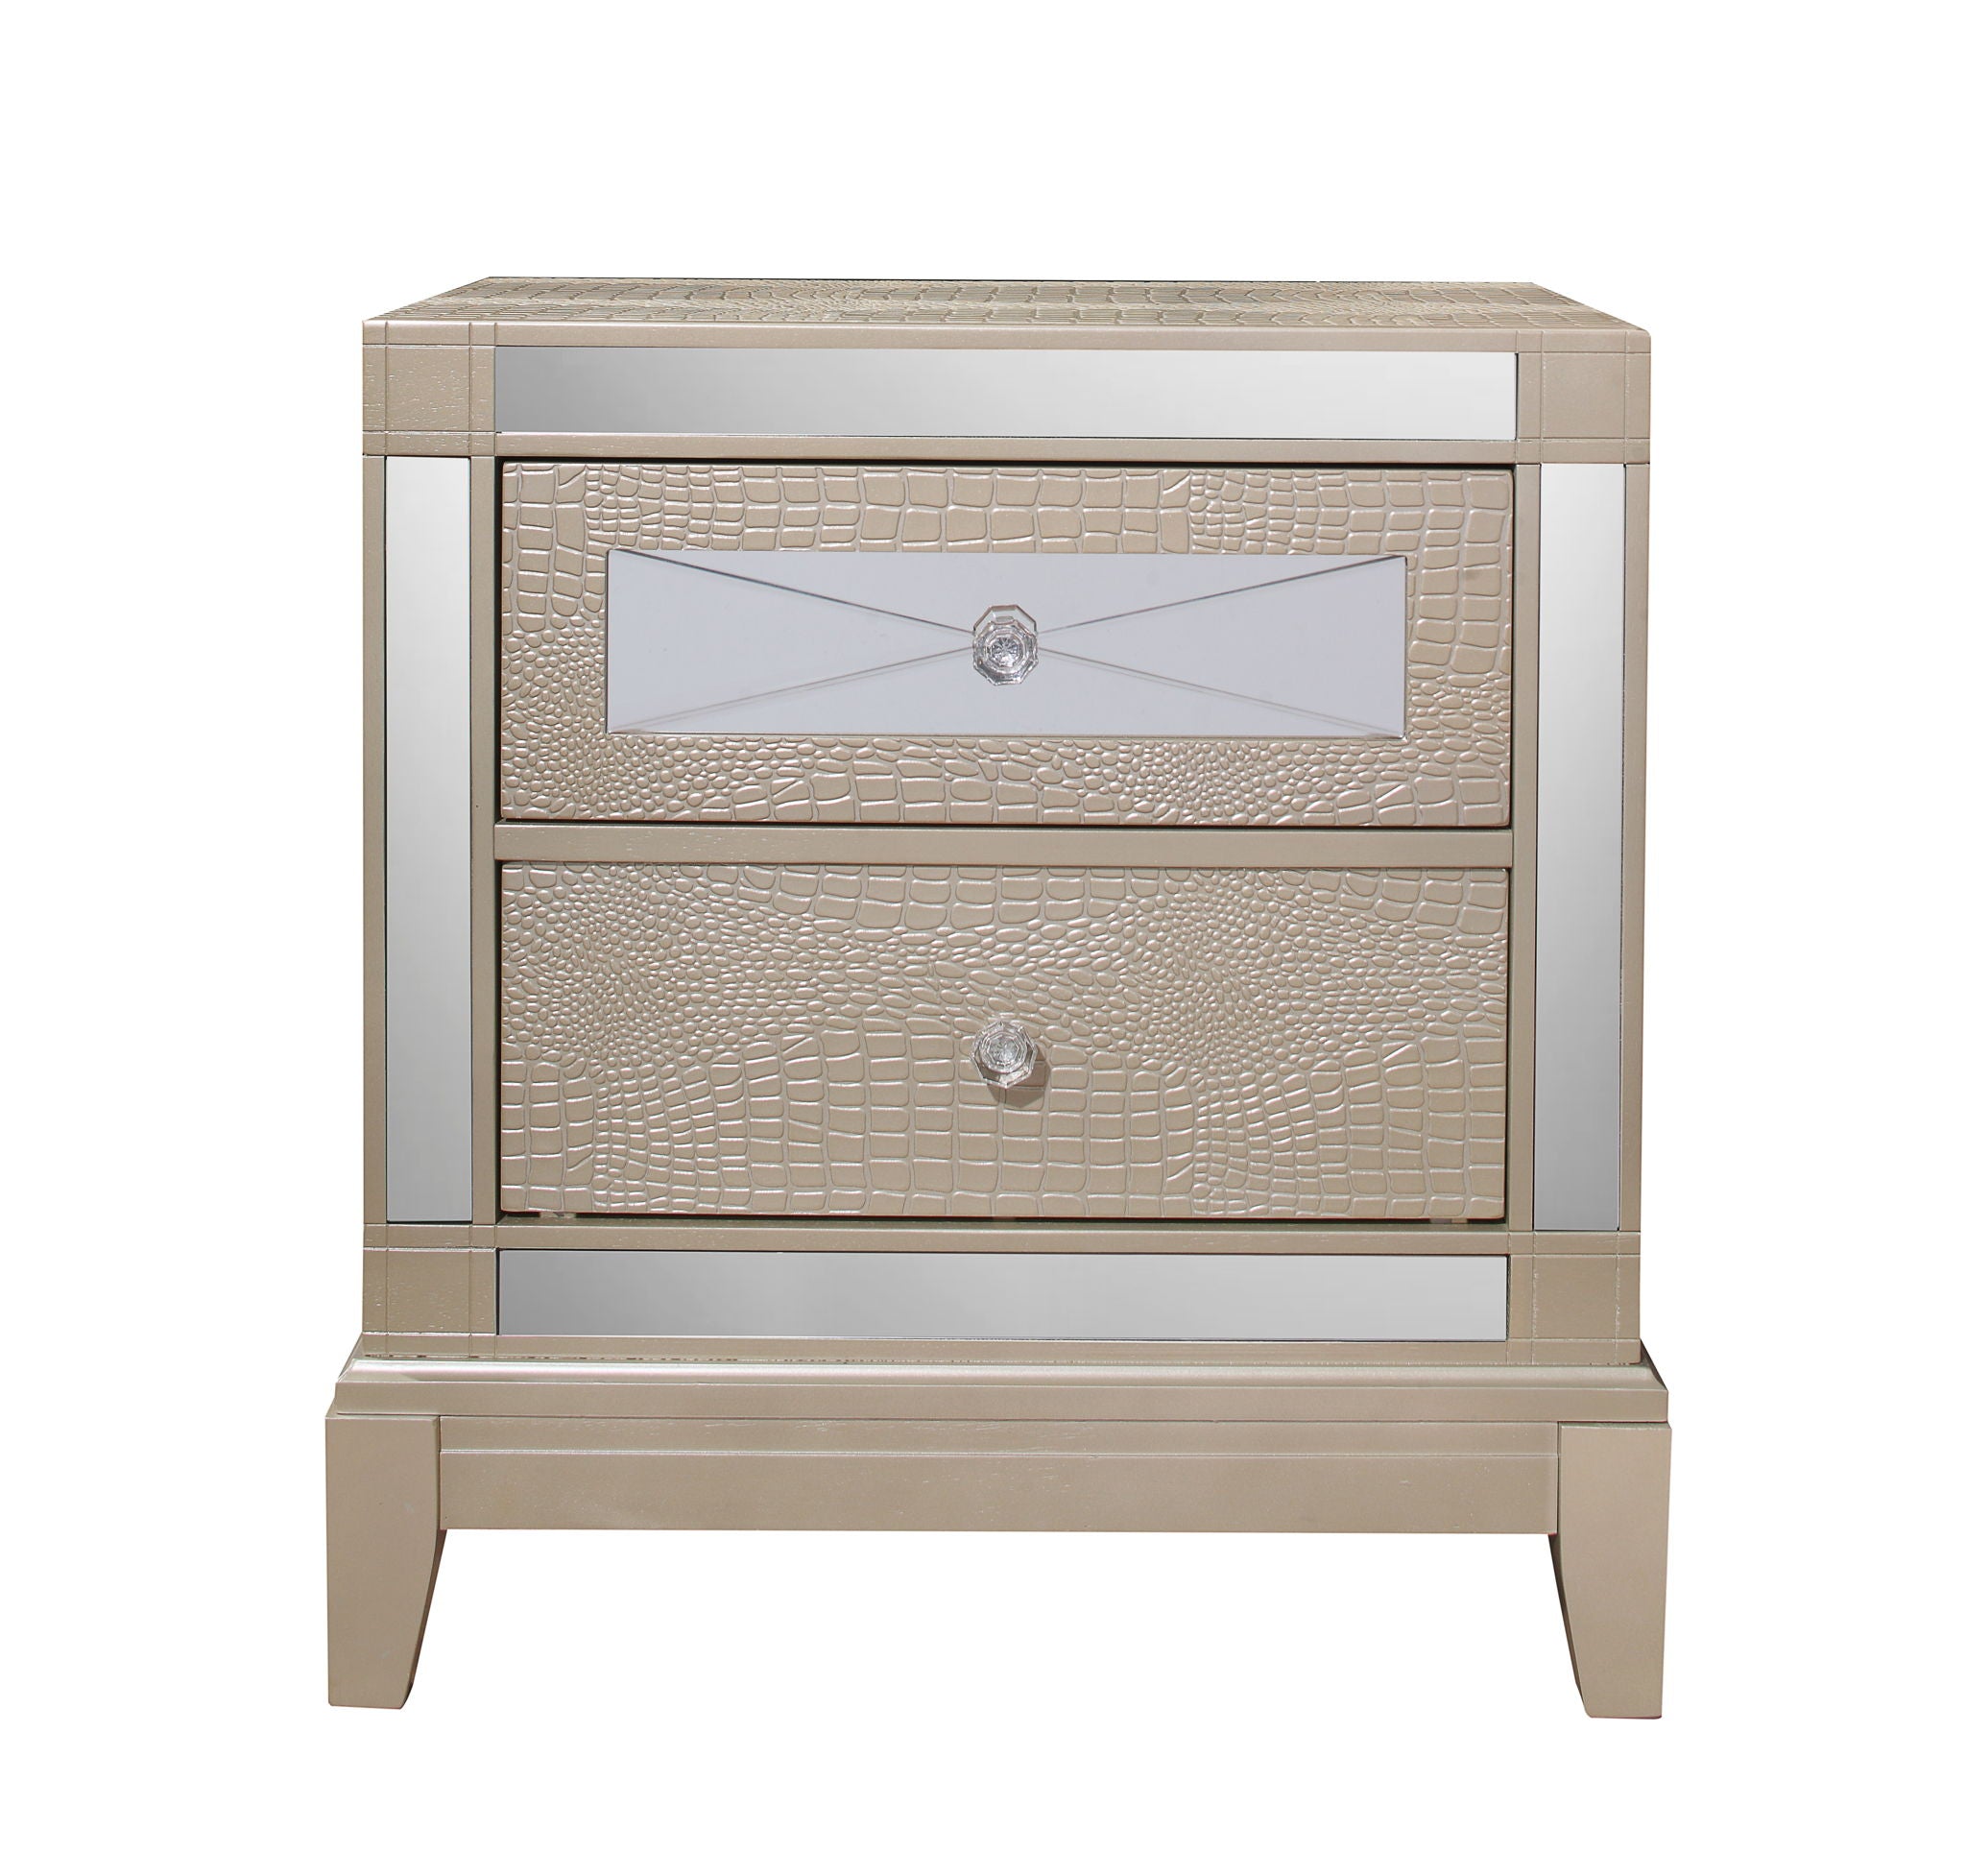 Nicolette - Champagne - Two Drawer Night Stand